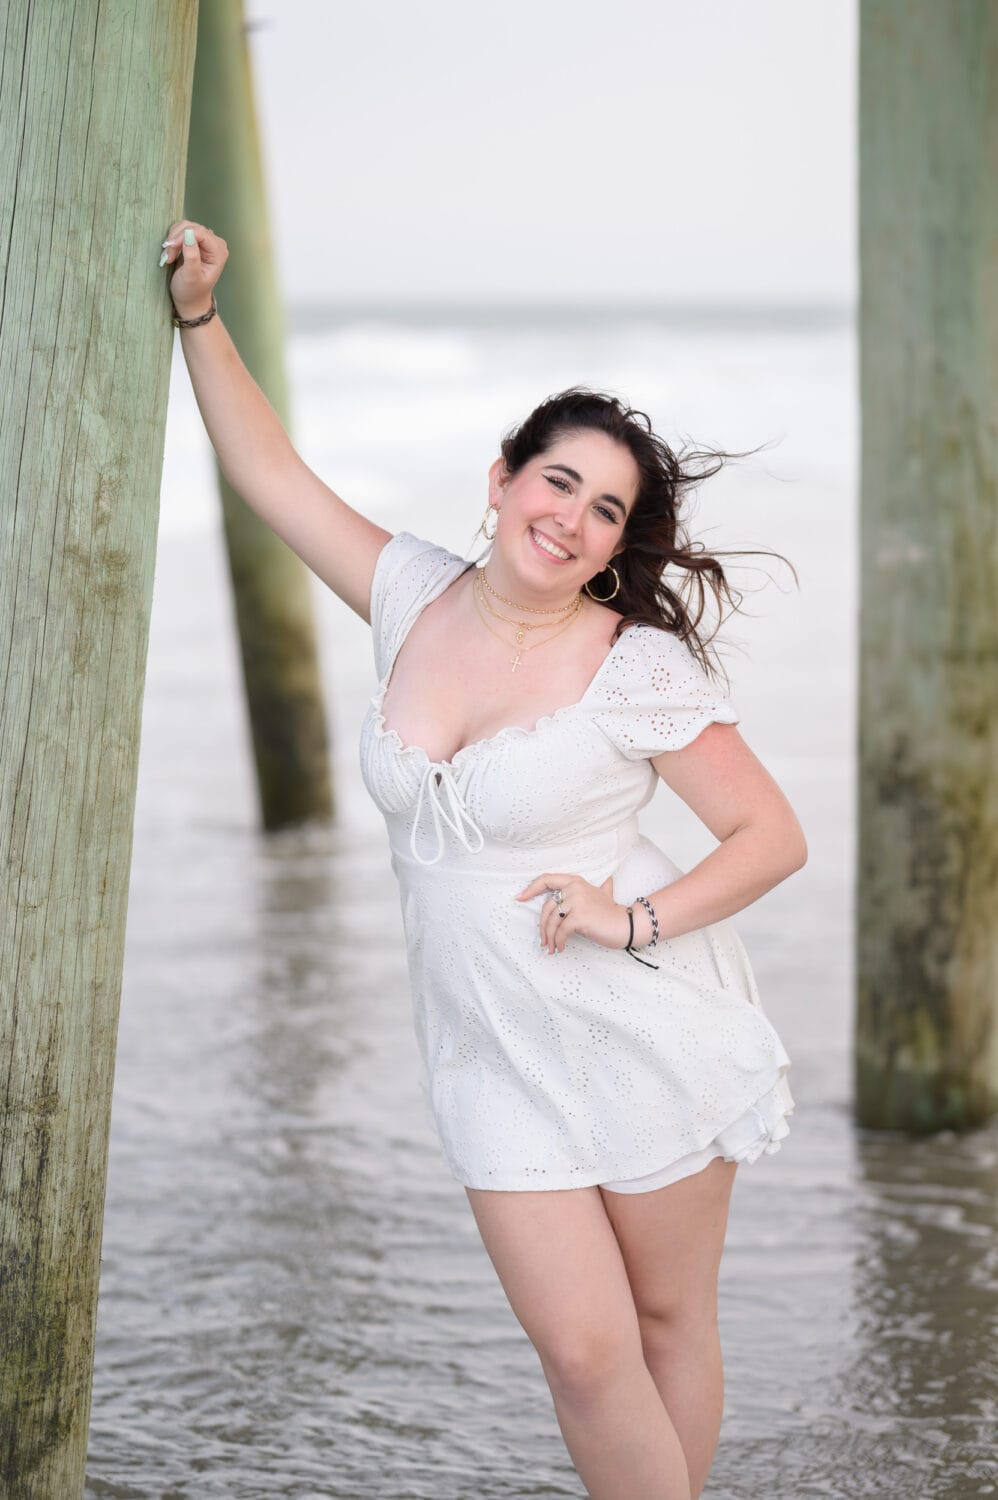 Senior portraits with 5 girls at the same time - Myrtle Beach State Park